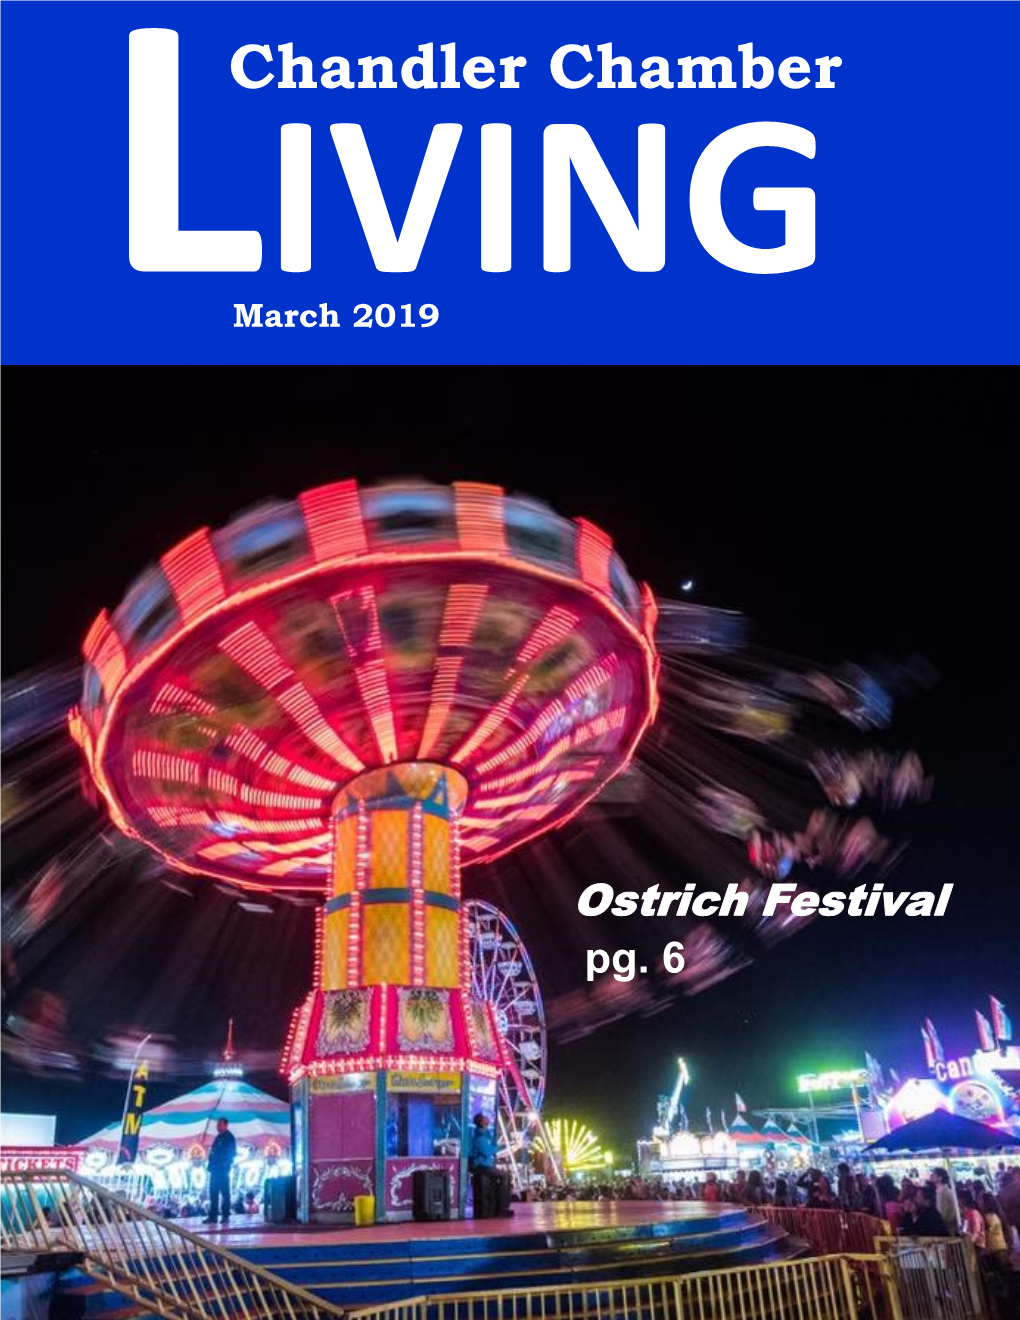 Chandler Chamber IVING March 2019